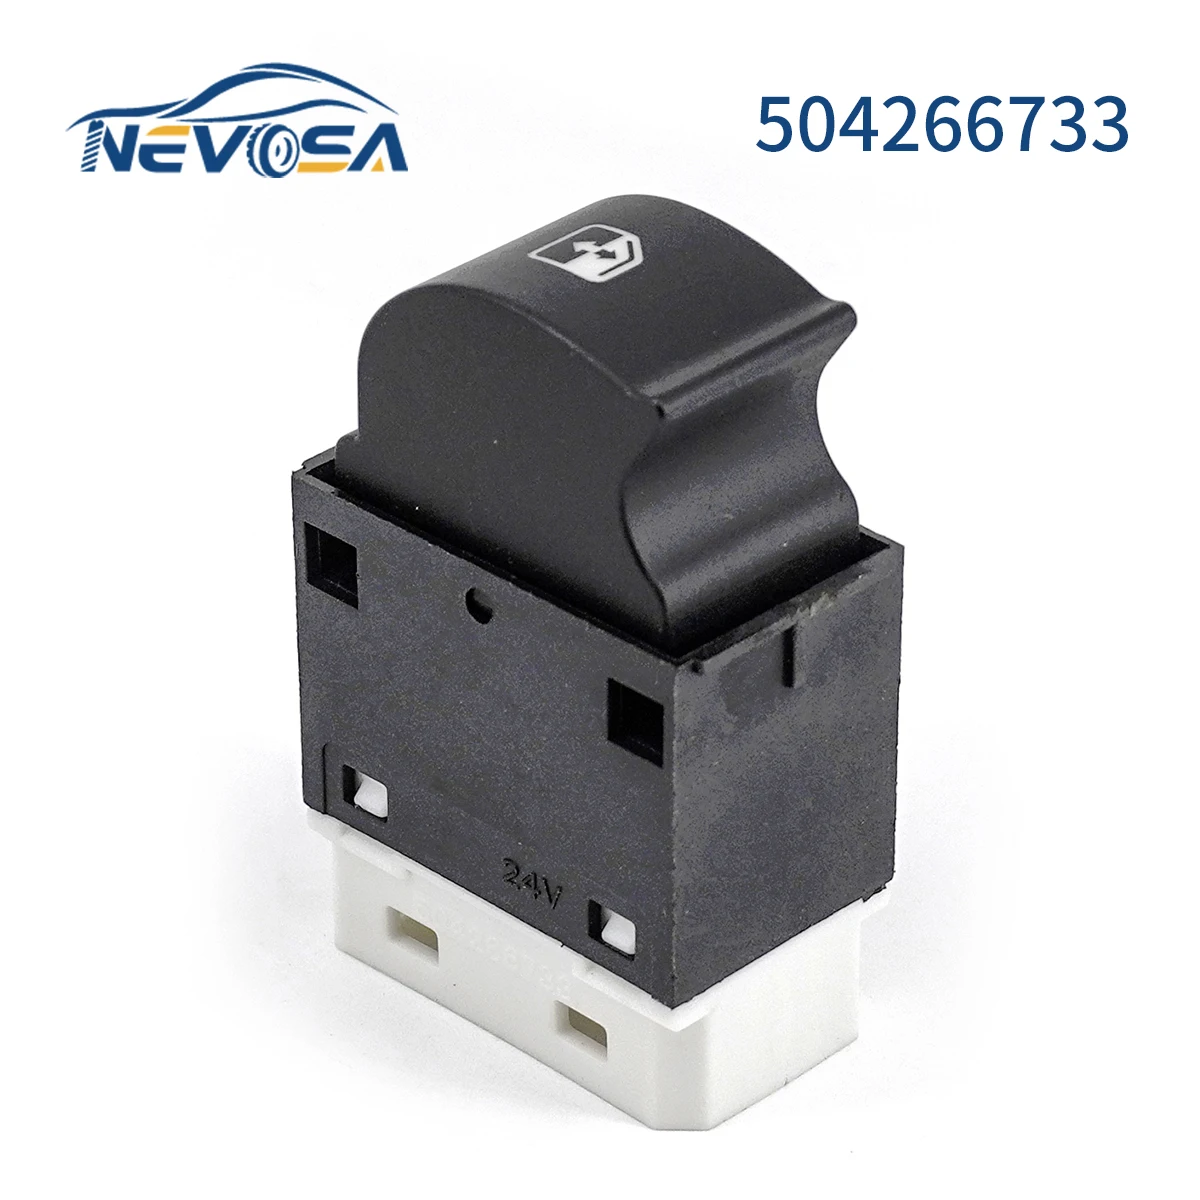 

NEVOSA For IVECO 504266733 504266734 Power Master Window Control Switch Glass Lifter Button Car Parts Accessories 6PINS